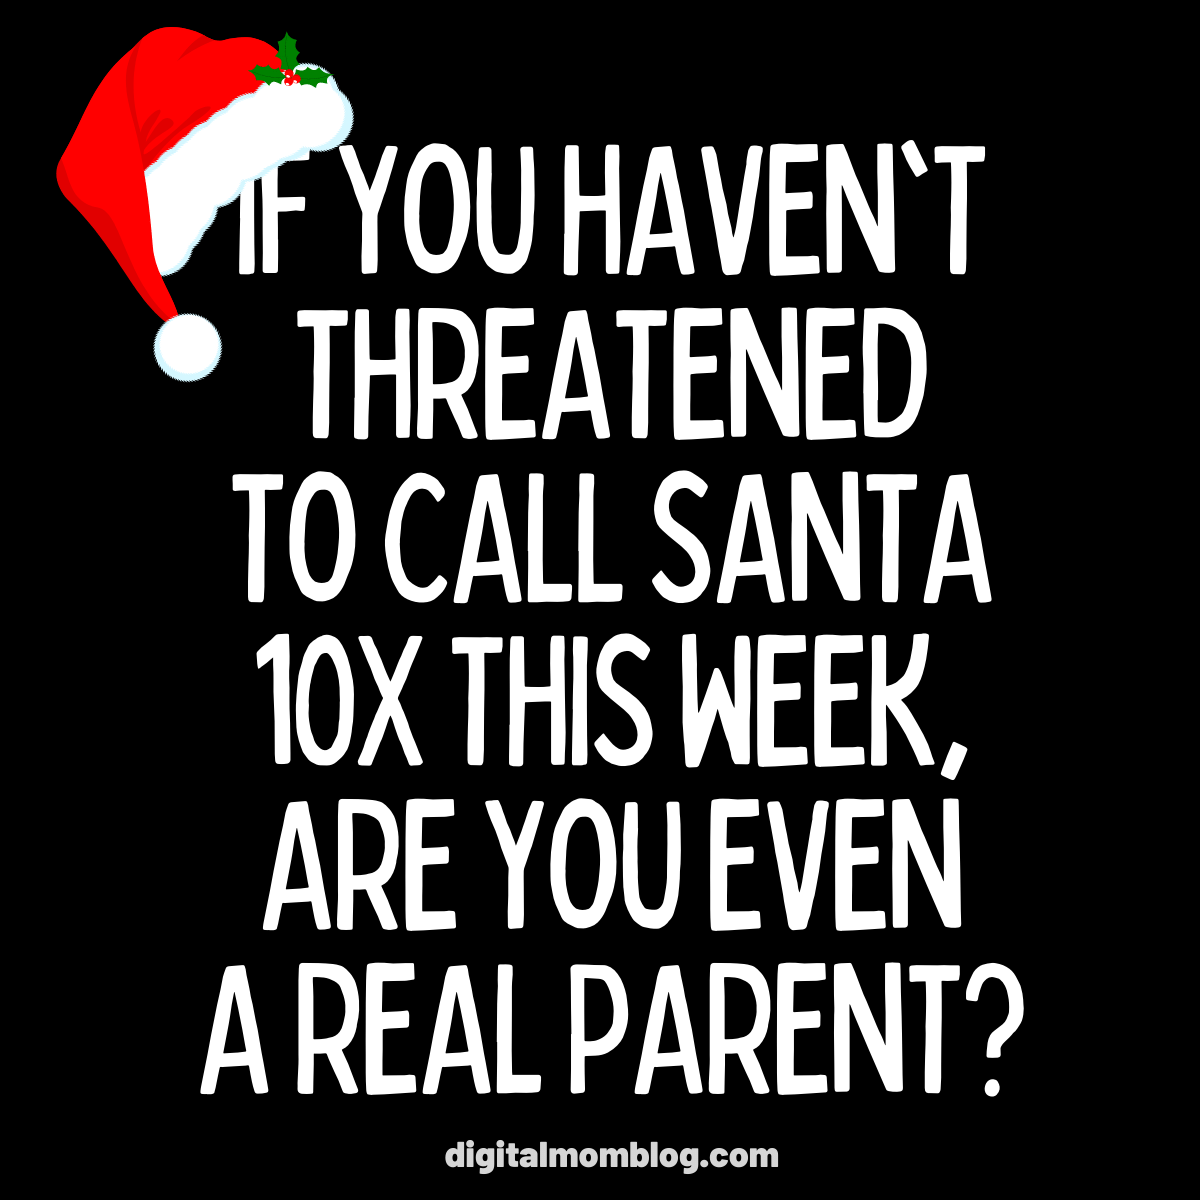 you even a parent if you haven t threatened to call santa - If You Haven'T Threatened To Call Santa 10X This Week. Are You Even A Real Parent? digitalmomblog.com